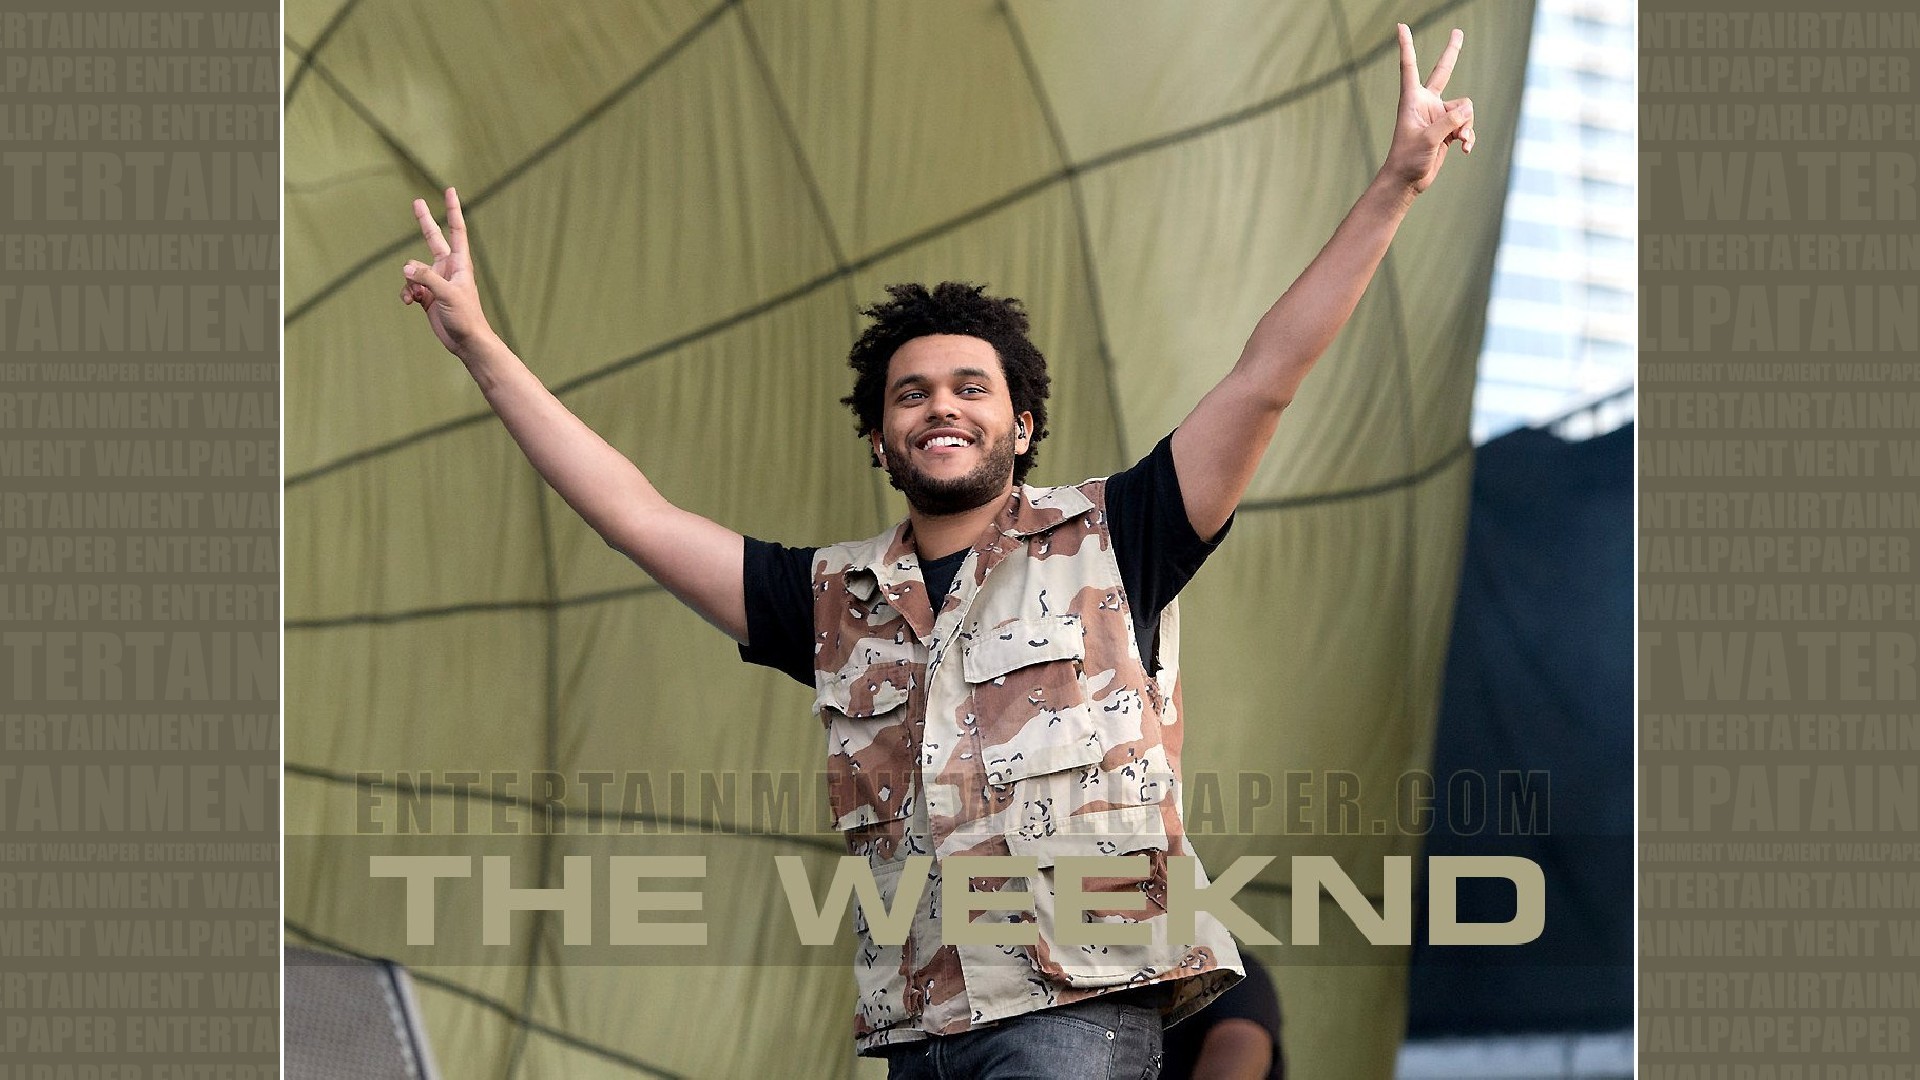 1920x1080 The Weeknd Wallpaper - Original size, download now.